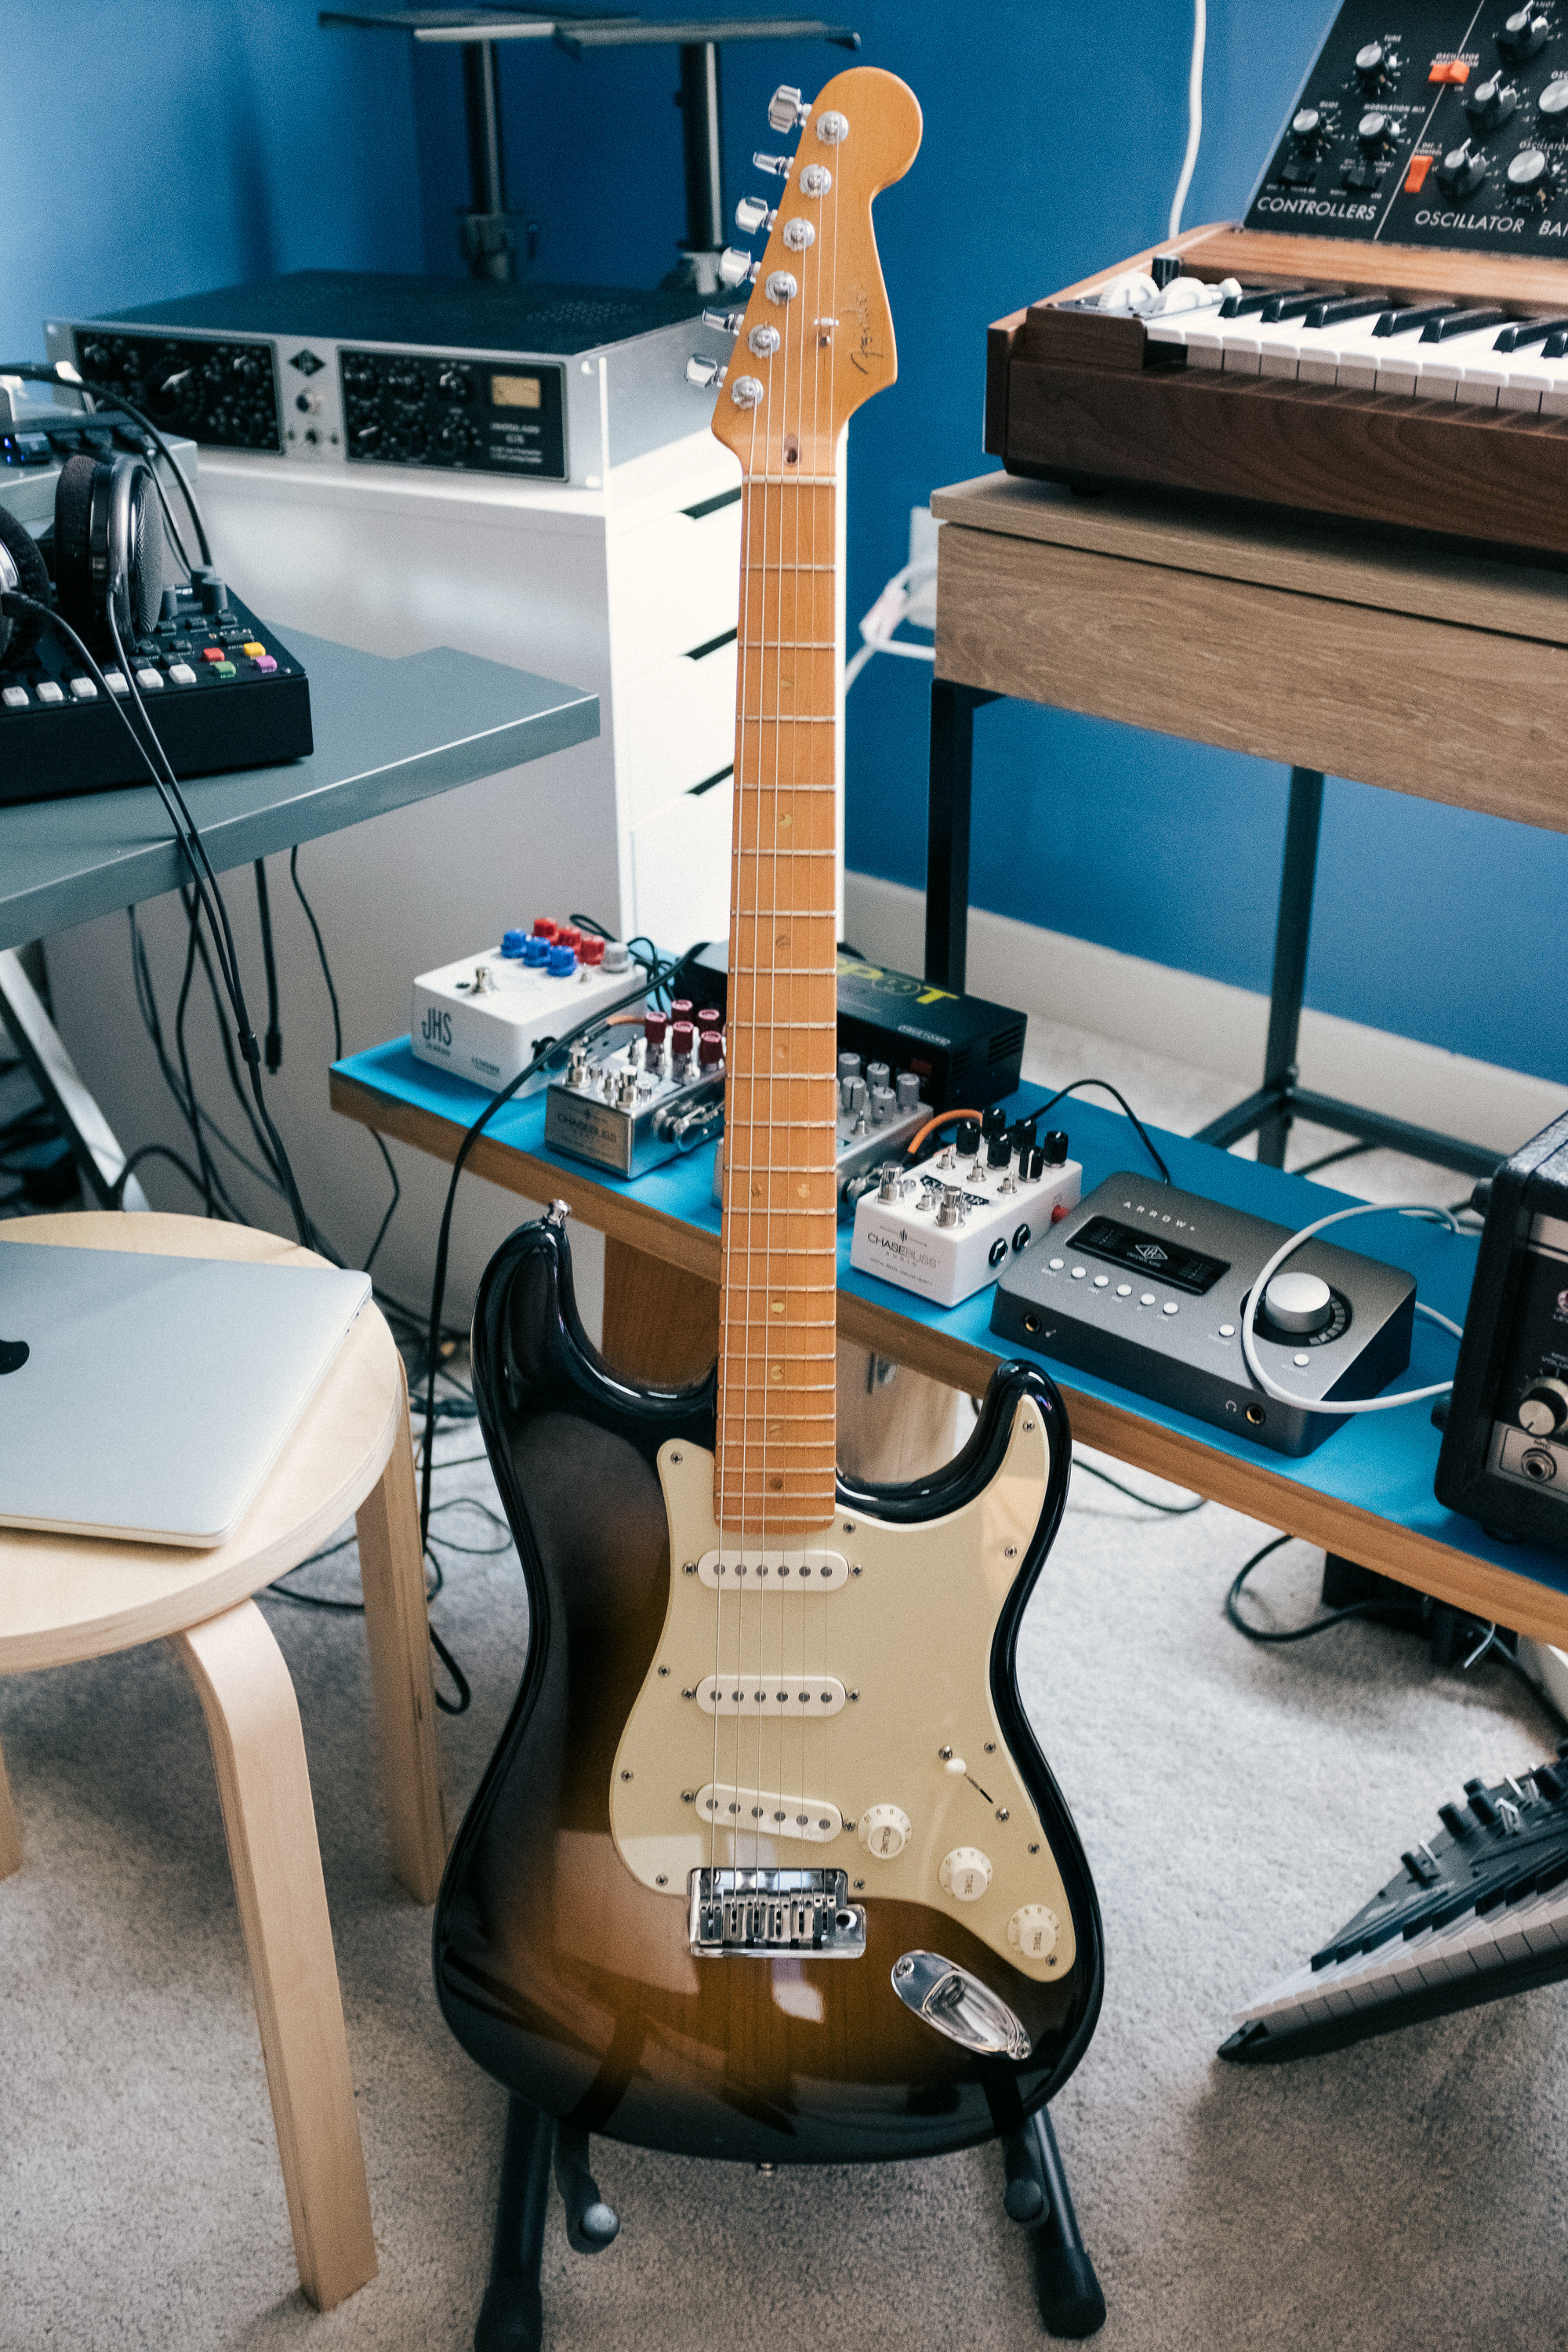 An image of the Fender Stratocaster.